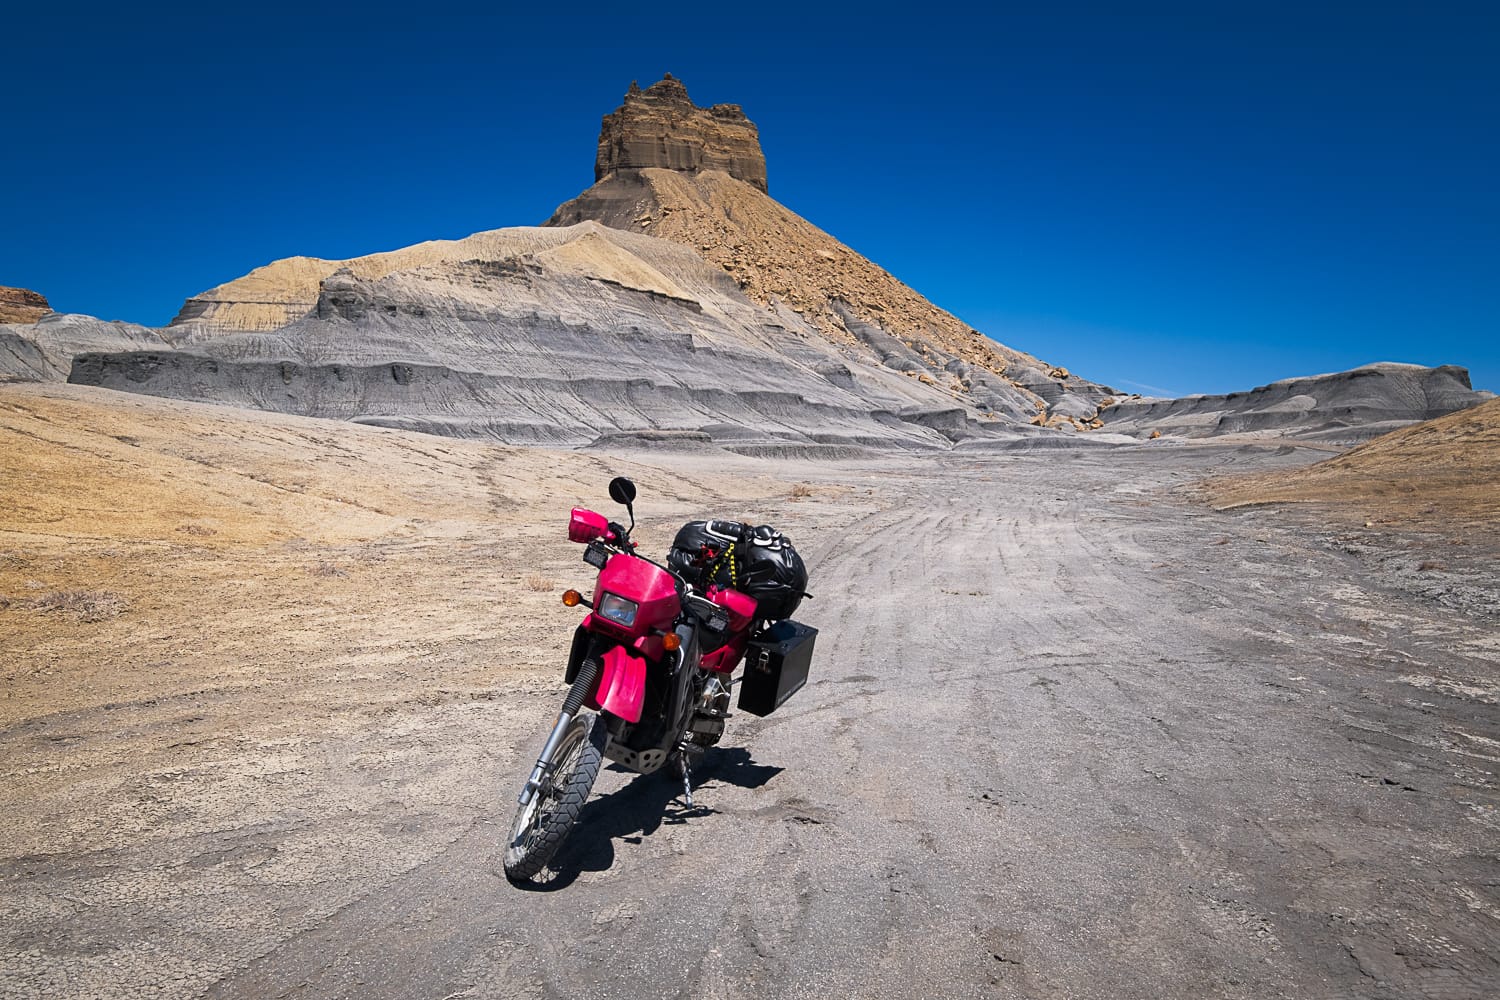 Motorcycle on a dirt road with towering mesa behind